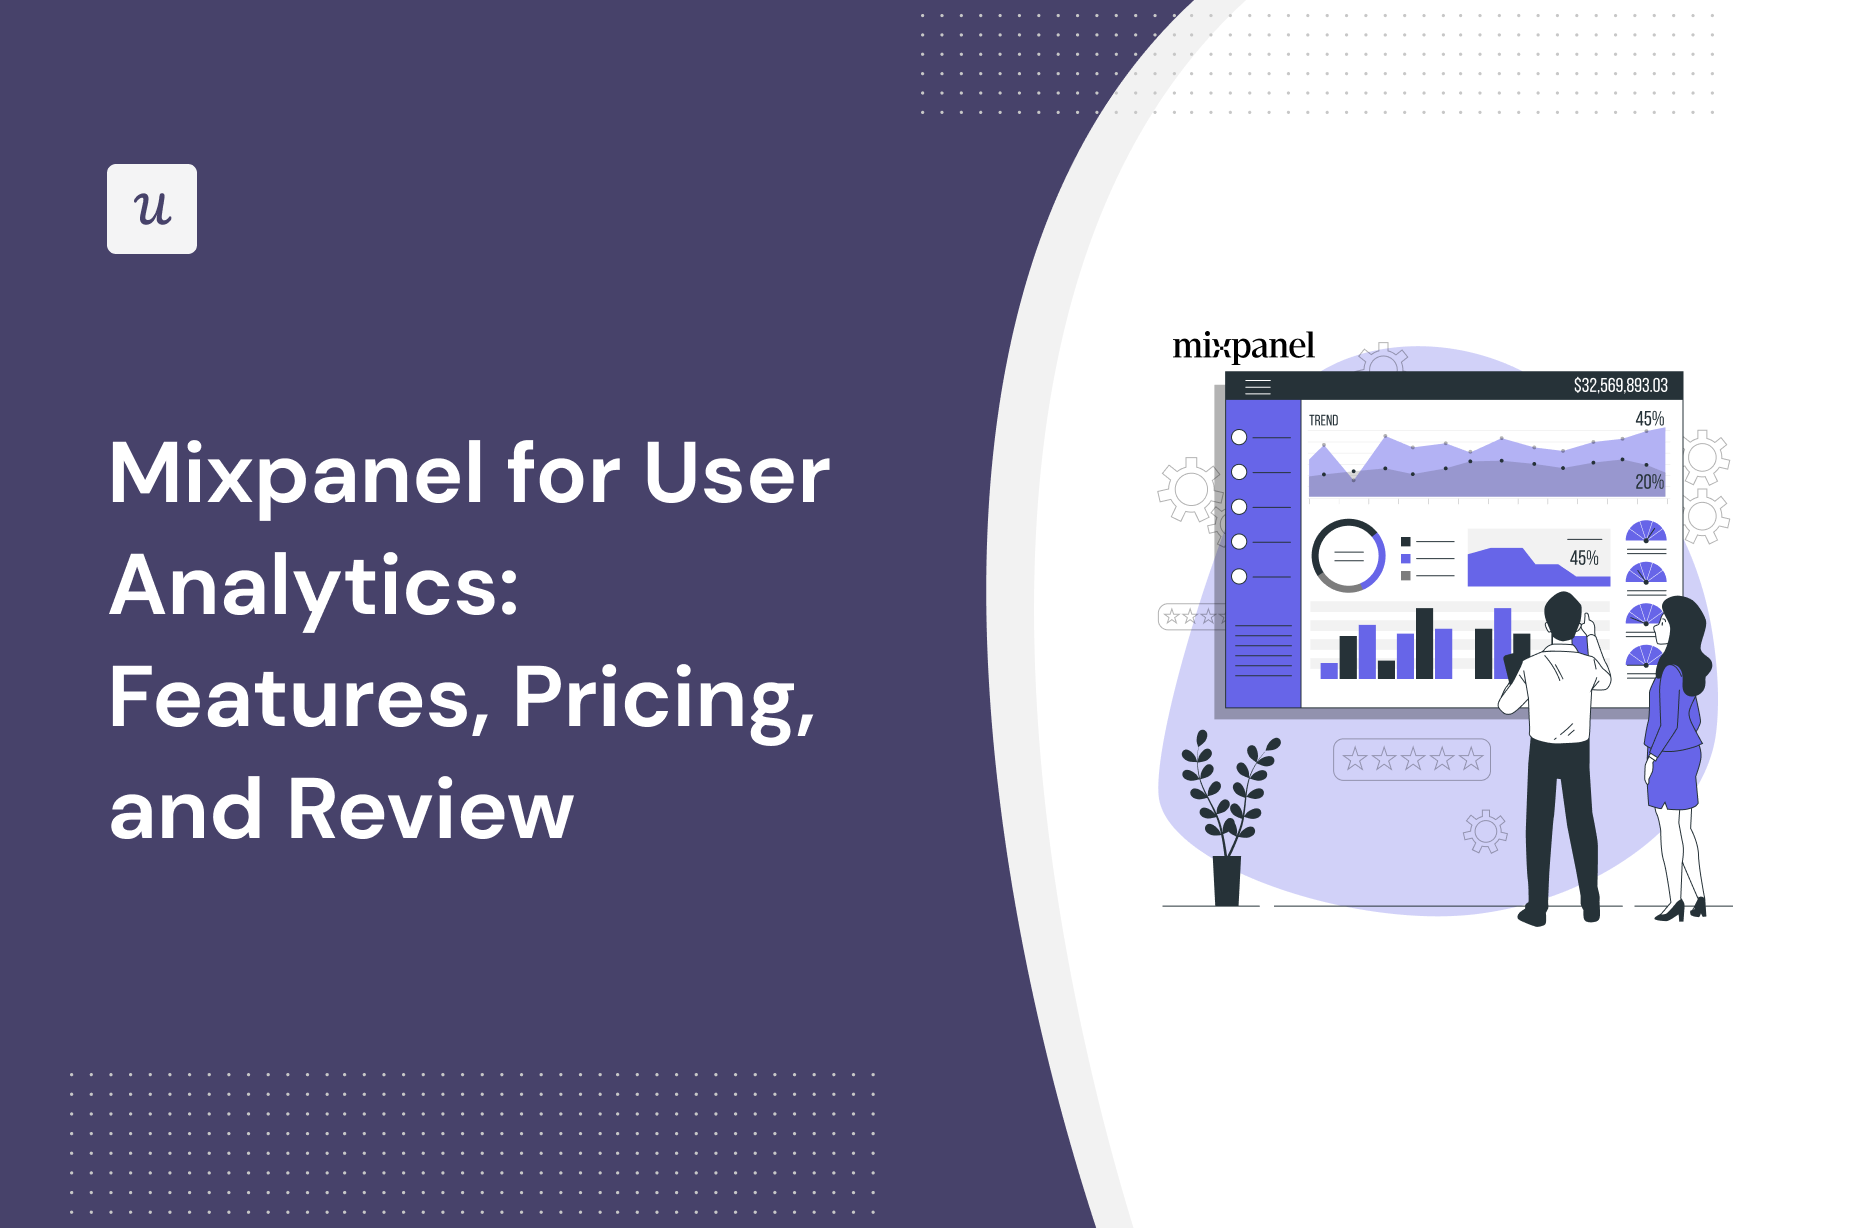 Mixpanel for User Analytics: Features, Pricing, and Review